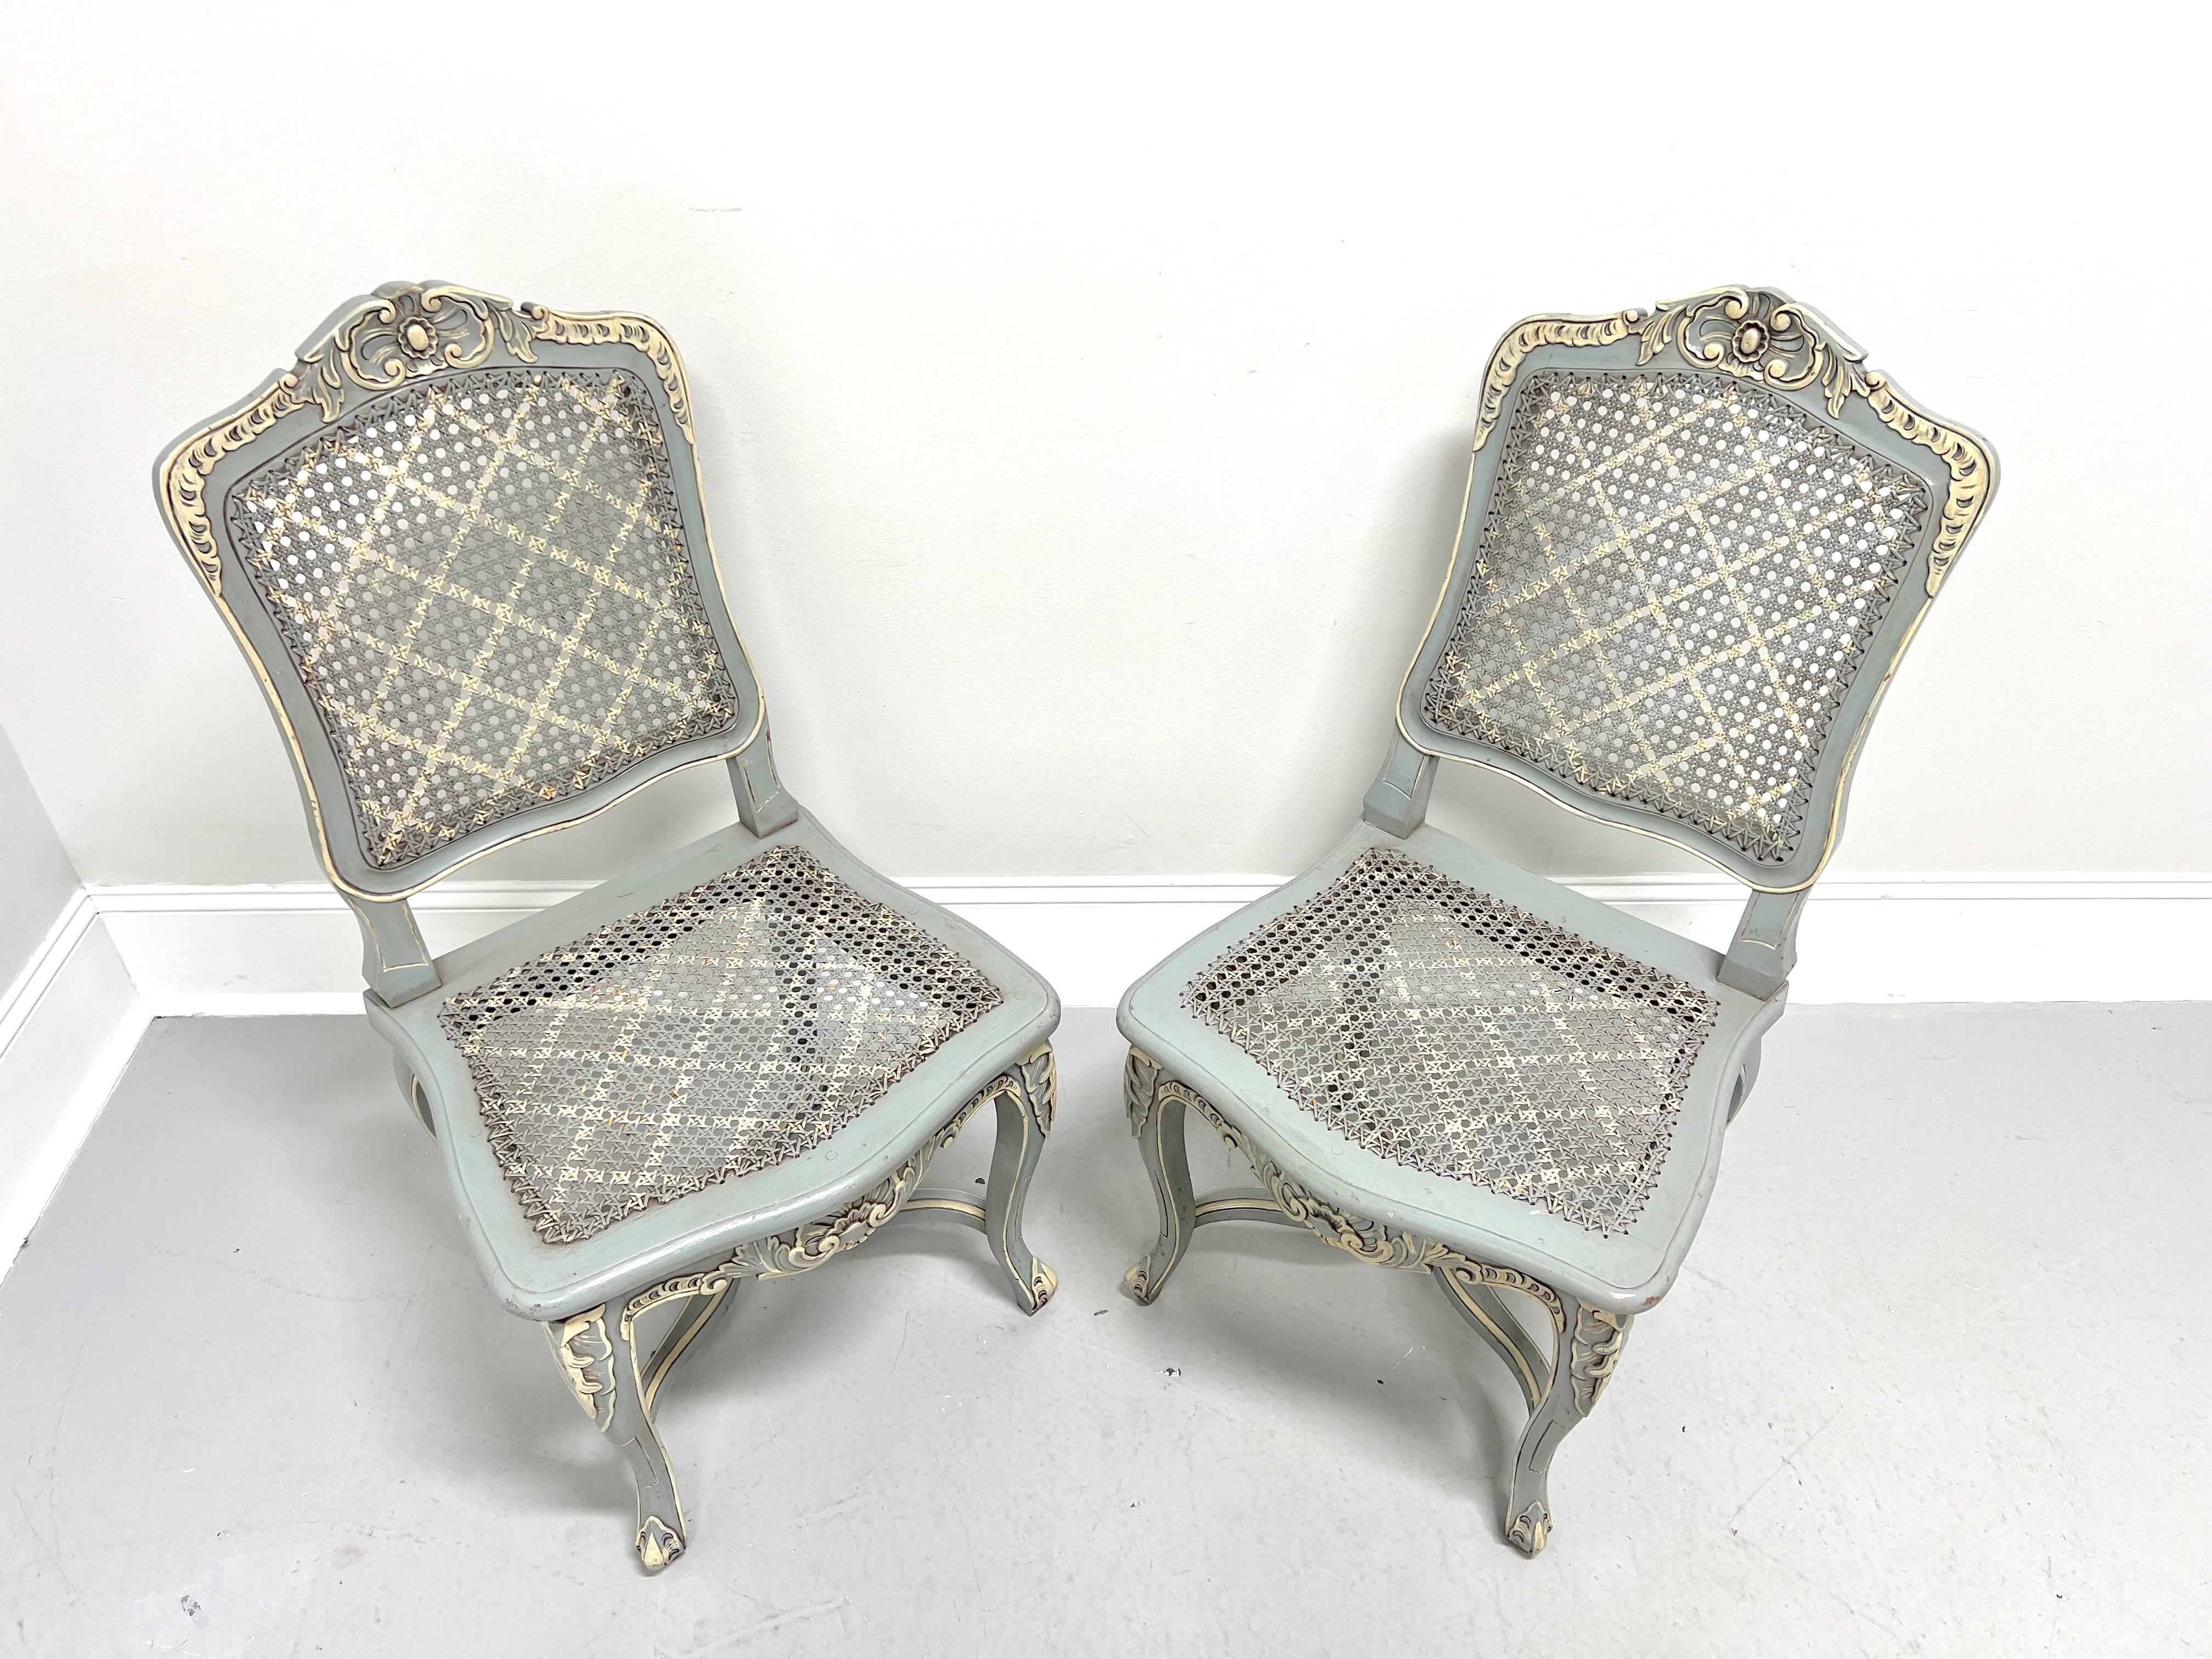 A pair of French Country Louis XV style side chairs, unbranded. Solid wood with a distressed painted finish of pale blue & ivory colors, decoratively embellished crest rail, woven caned backs, woven caned seats, decoratively embellished apron &